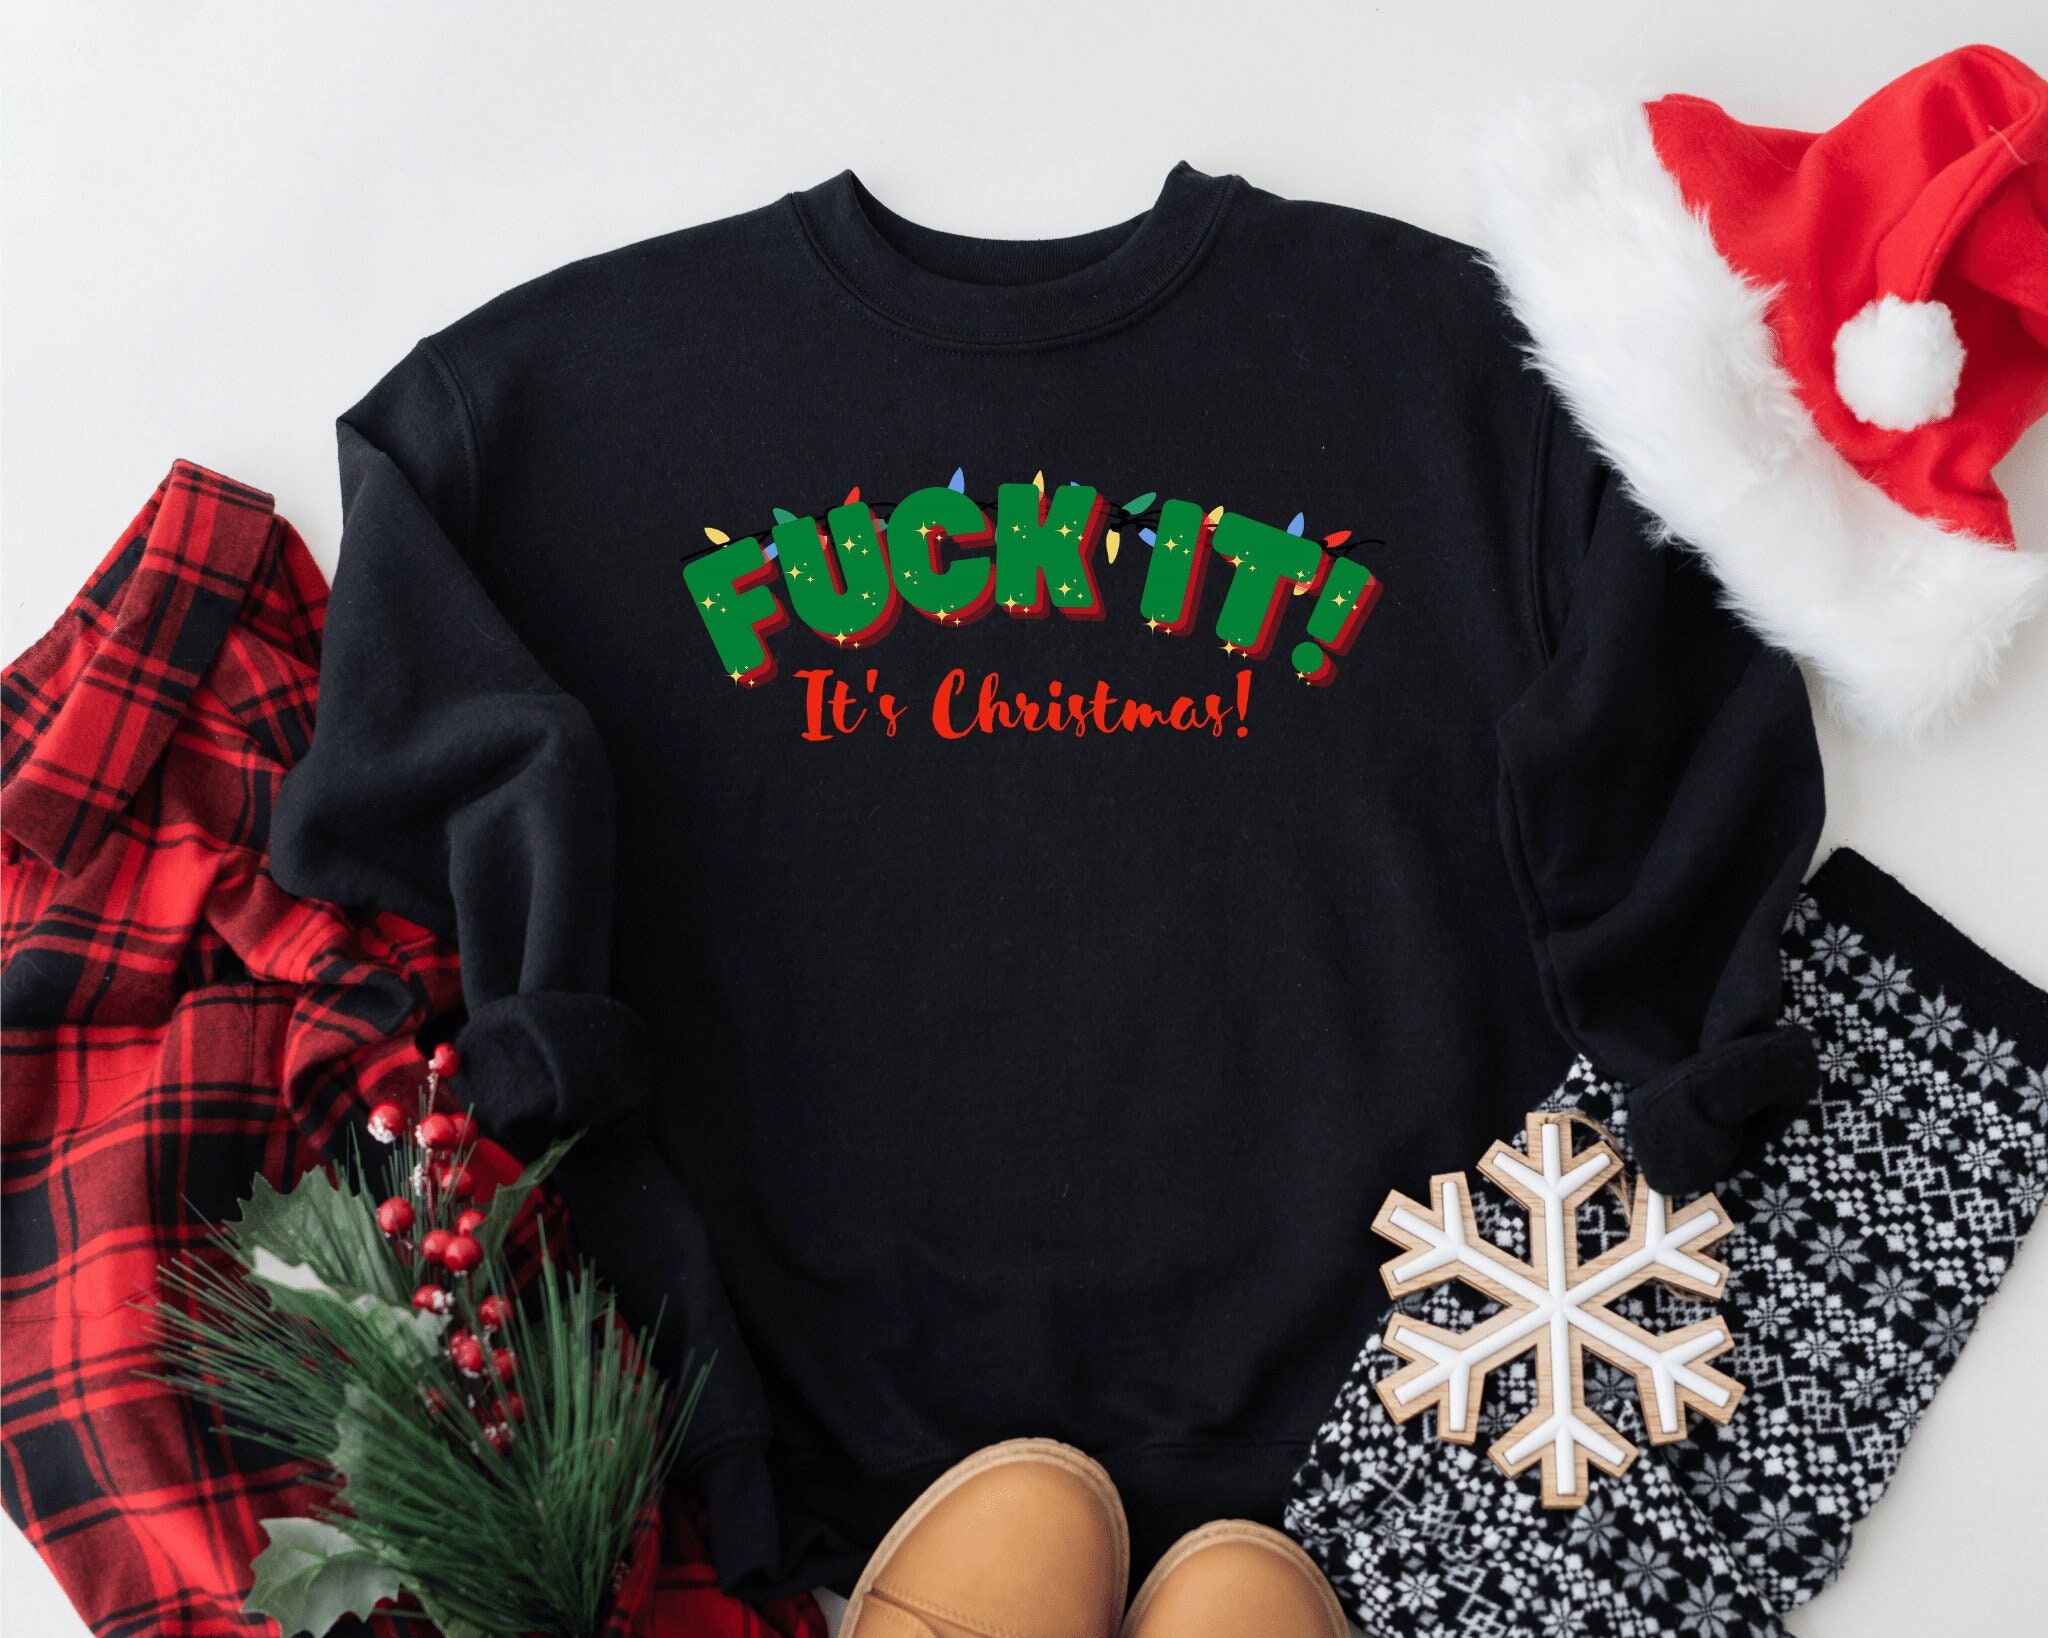 Front Fuck Off, Fuck You, Insulting Gifts, Rude Ornaments, Ugly Sweate –  Cute But Rude